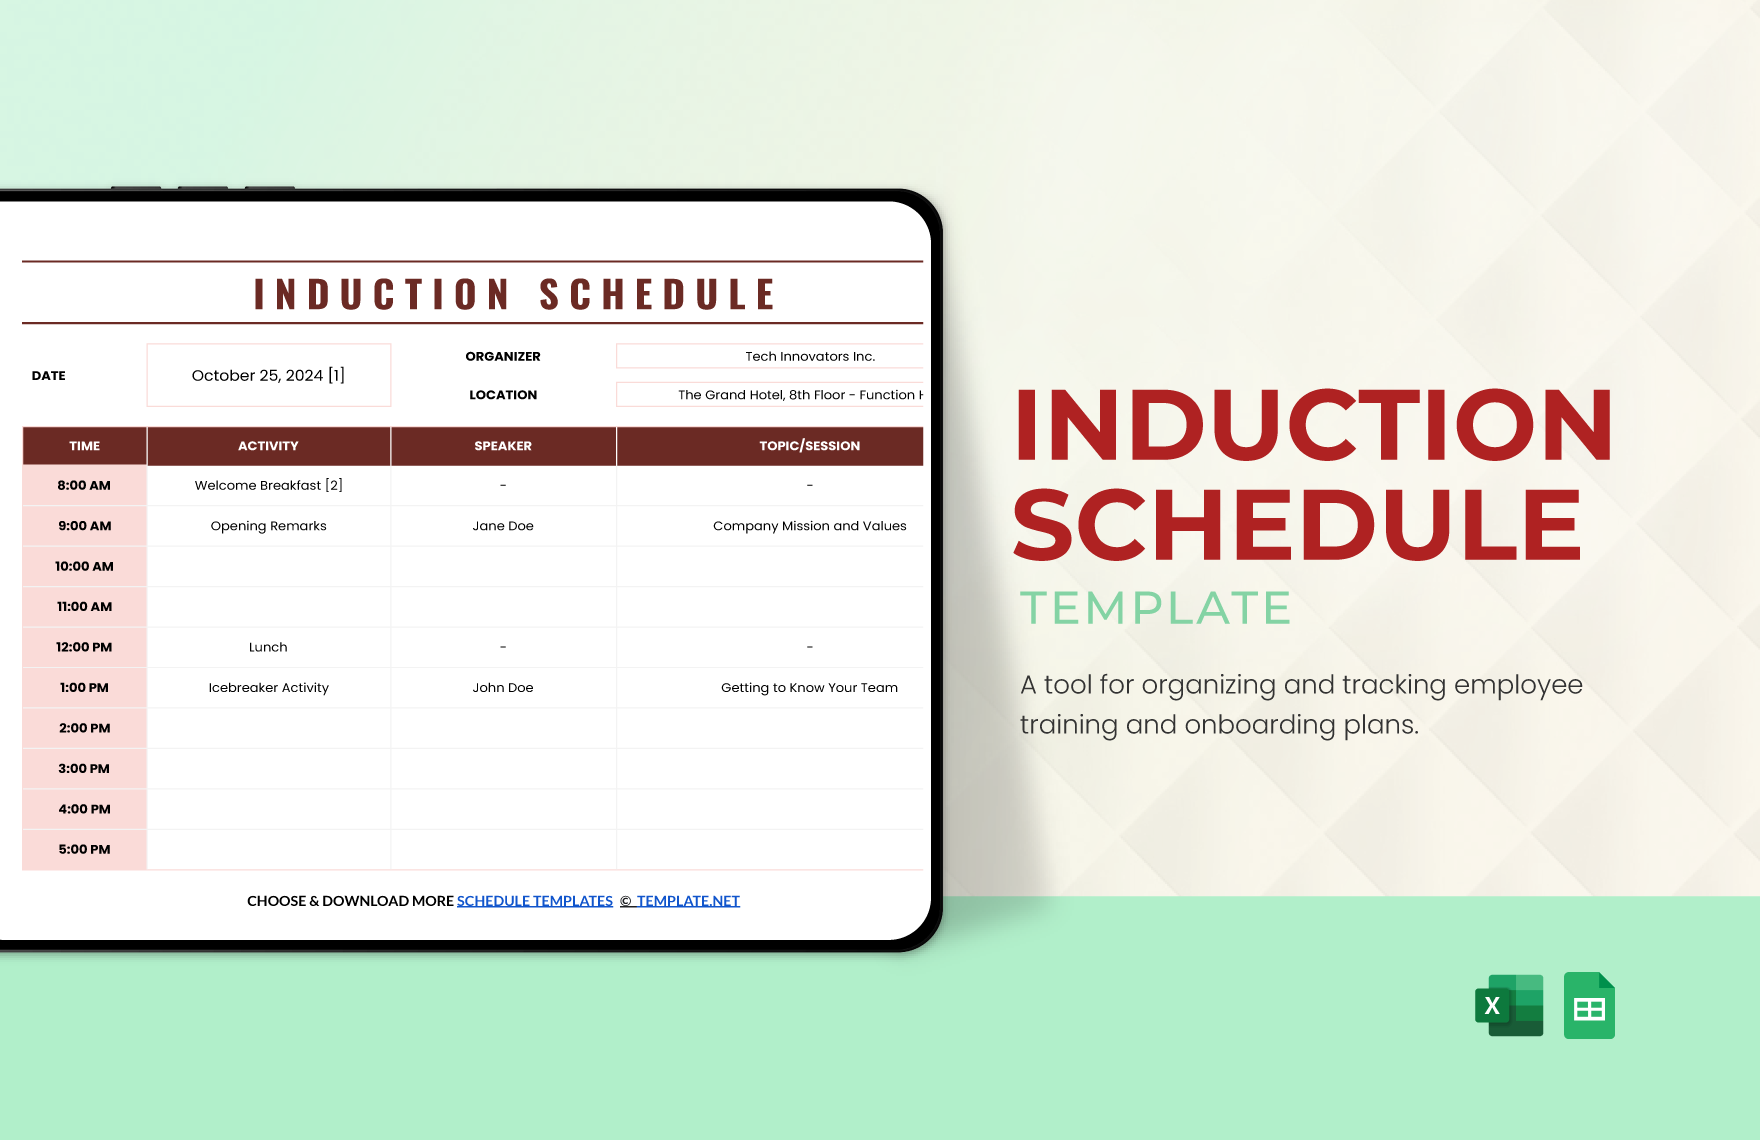 Induction Schedule Template in Excel, Google Sheets